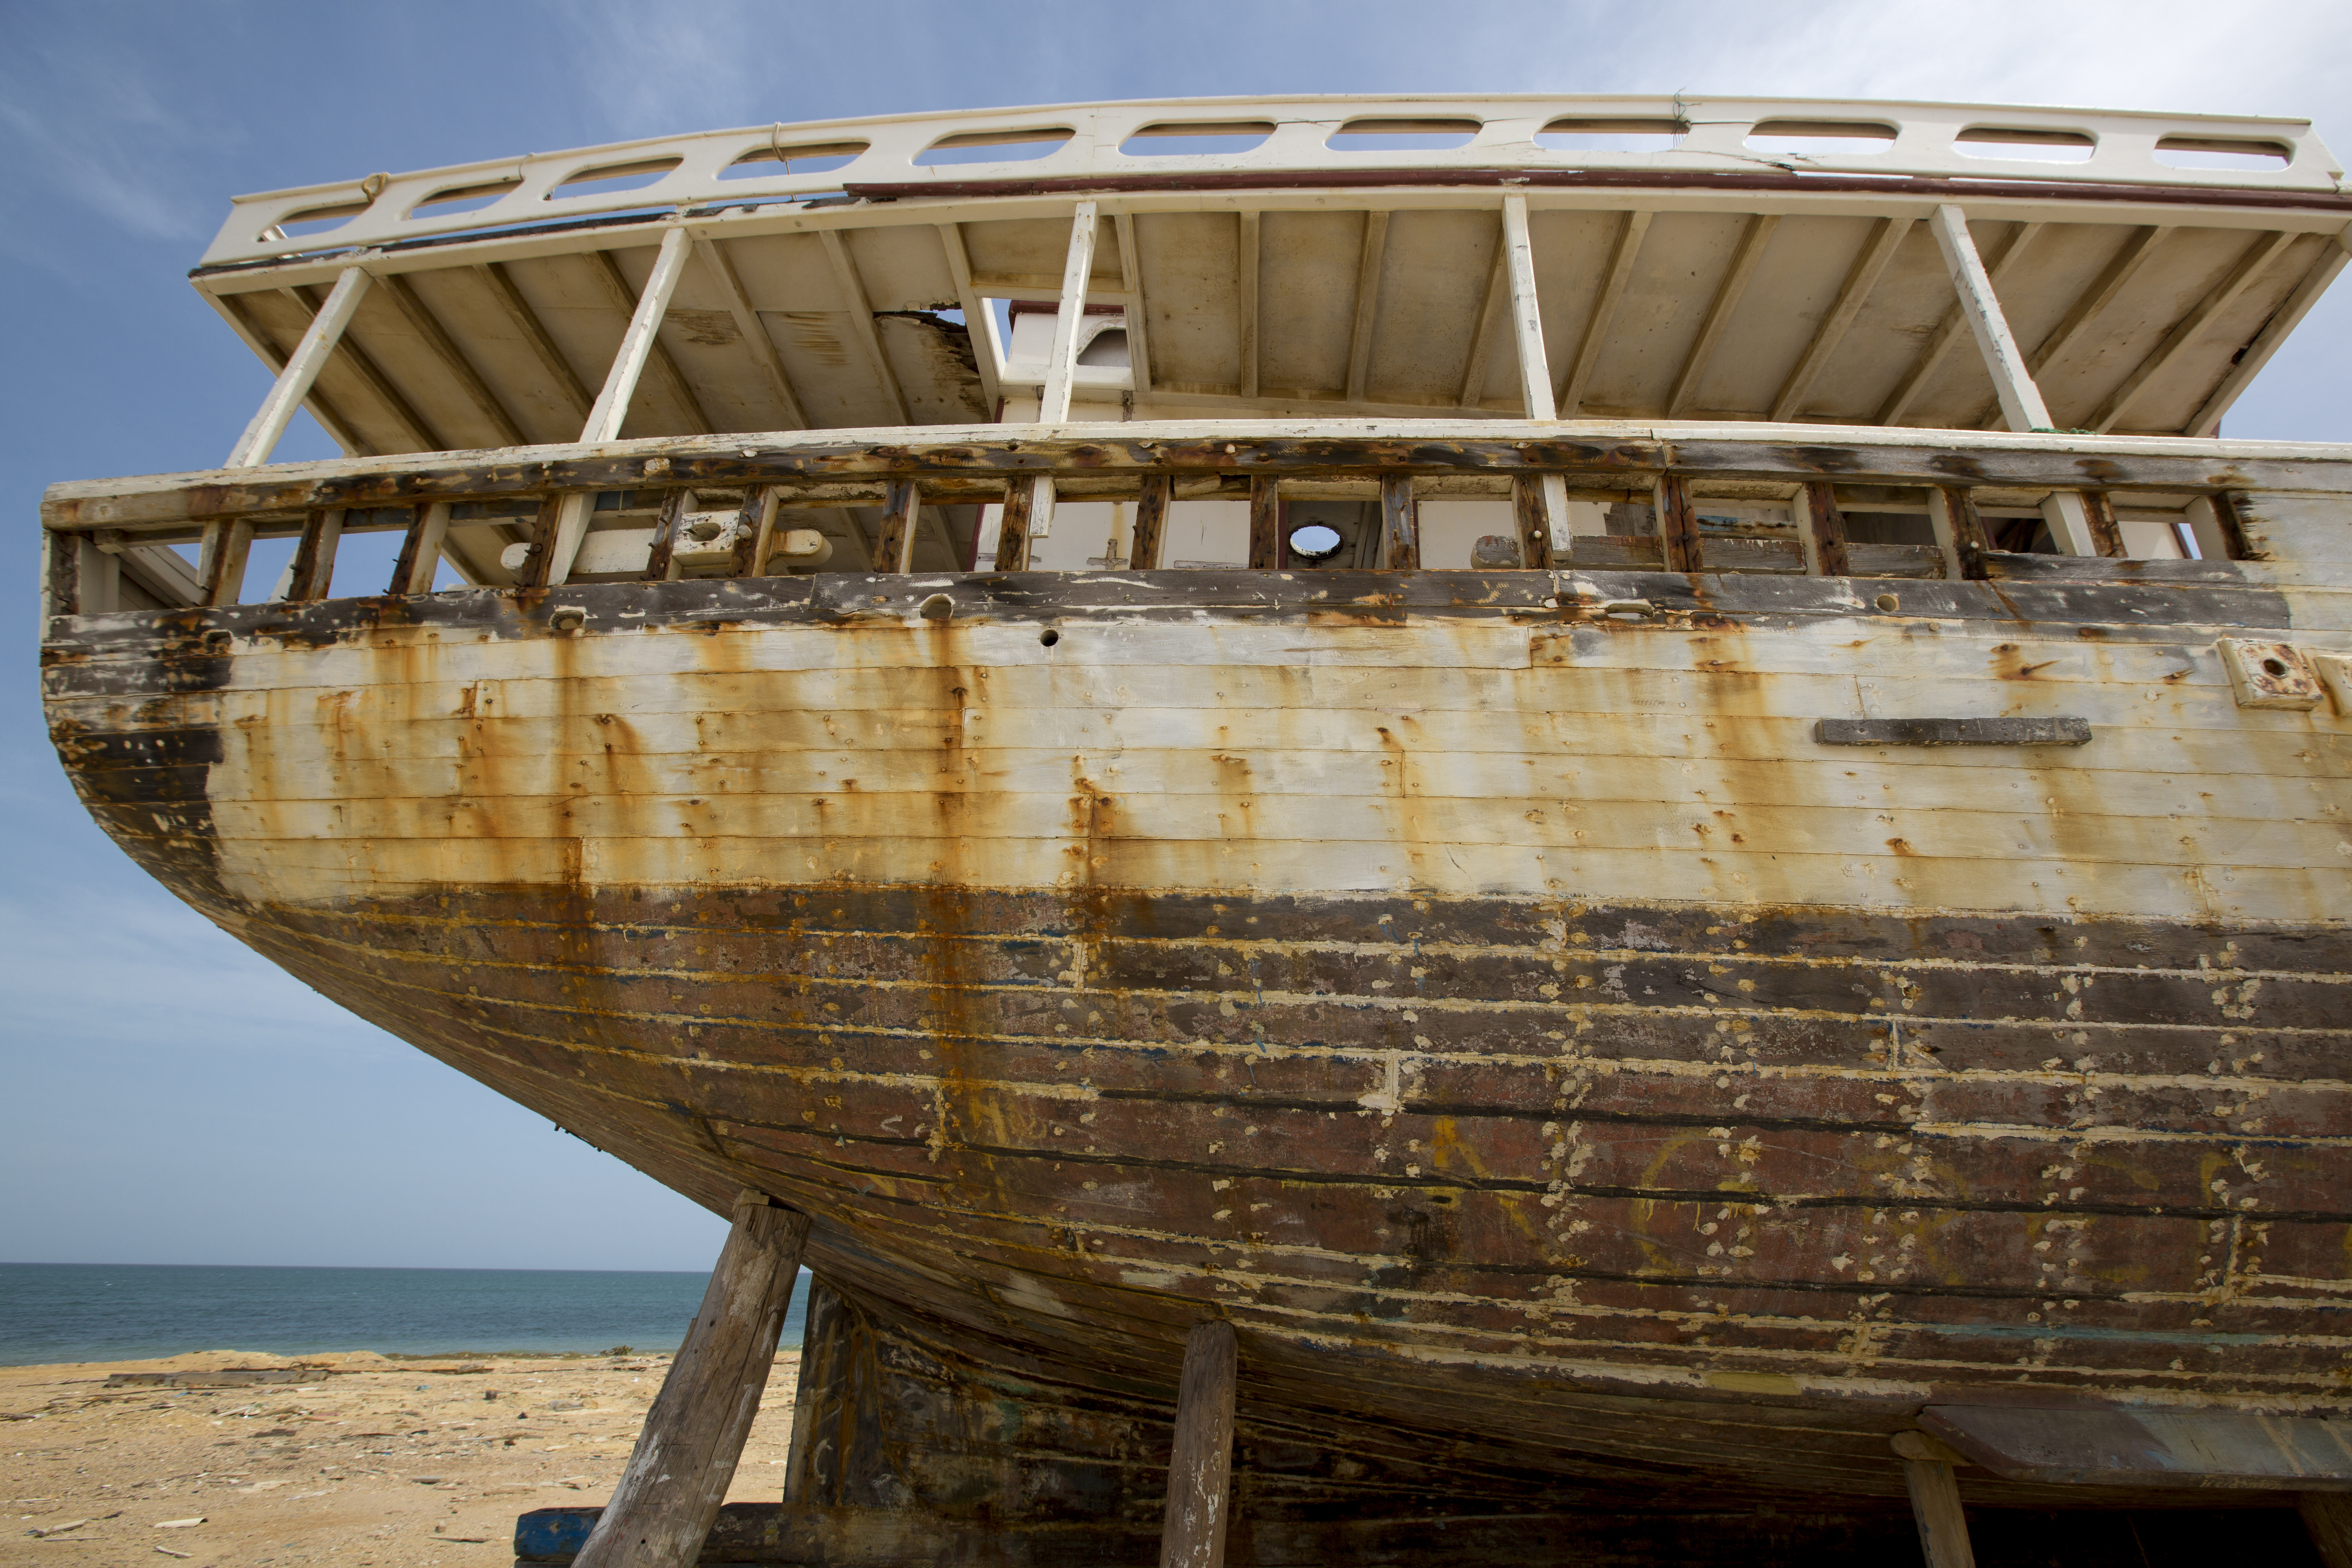 Shipwreck standing on the beach with the sea in the background. Margarita Island. Venezuela. Photo courtesy of DollarPhotoClub.com